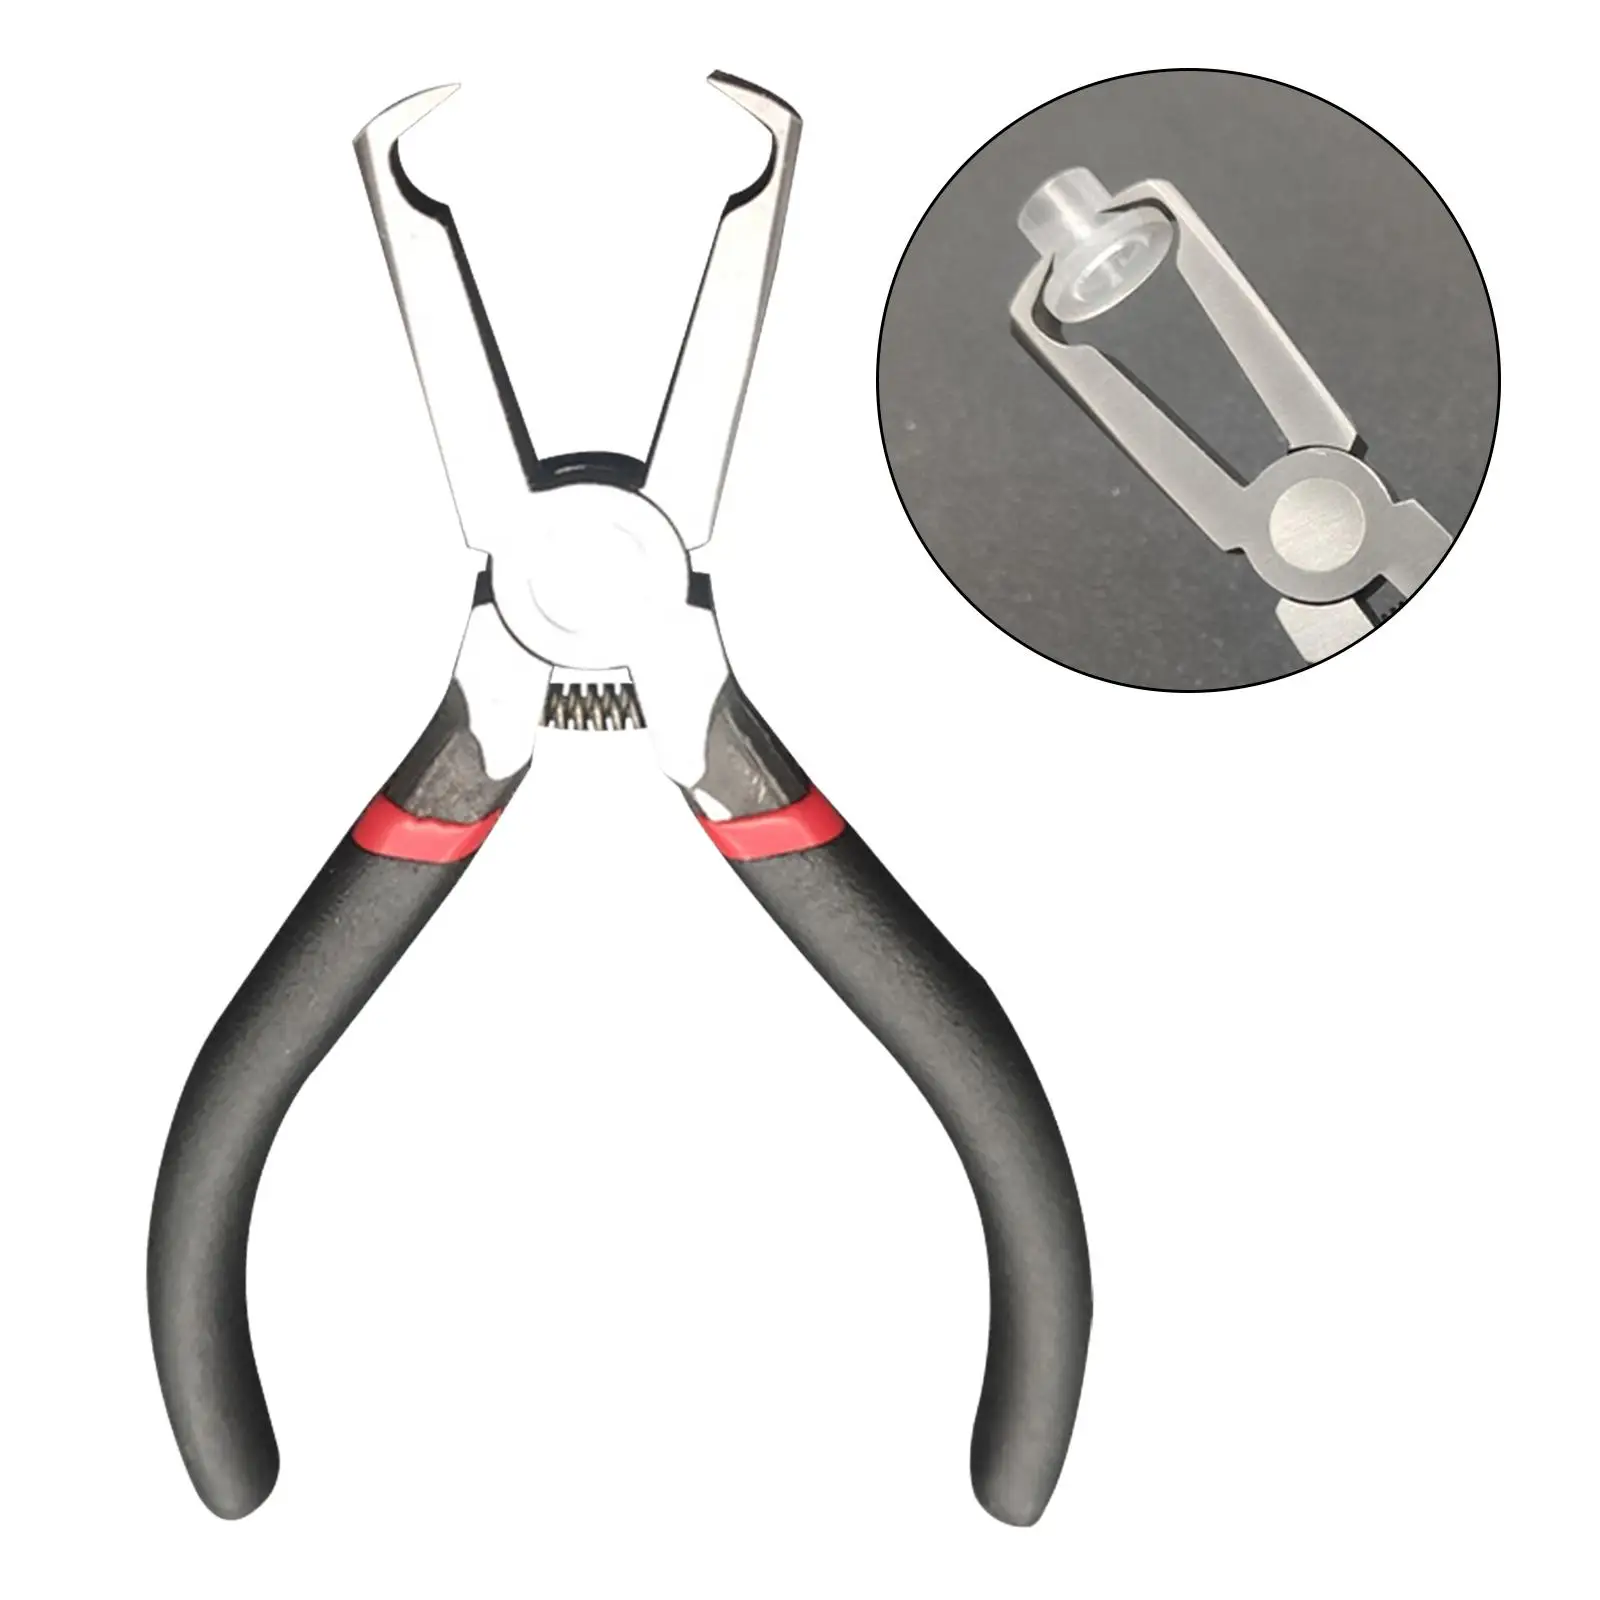 Water Heater Repair Pliers Strong Household Appliances High Hardness Spring Loaded Hose Clamp Plier for Home Applications